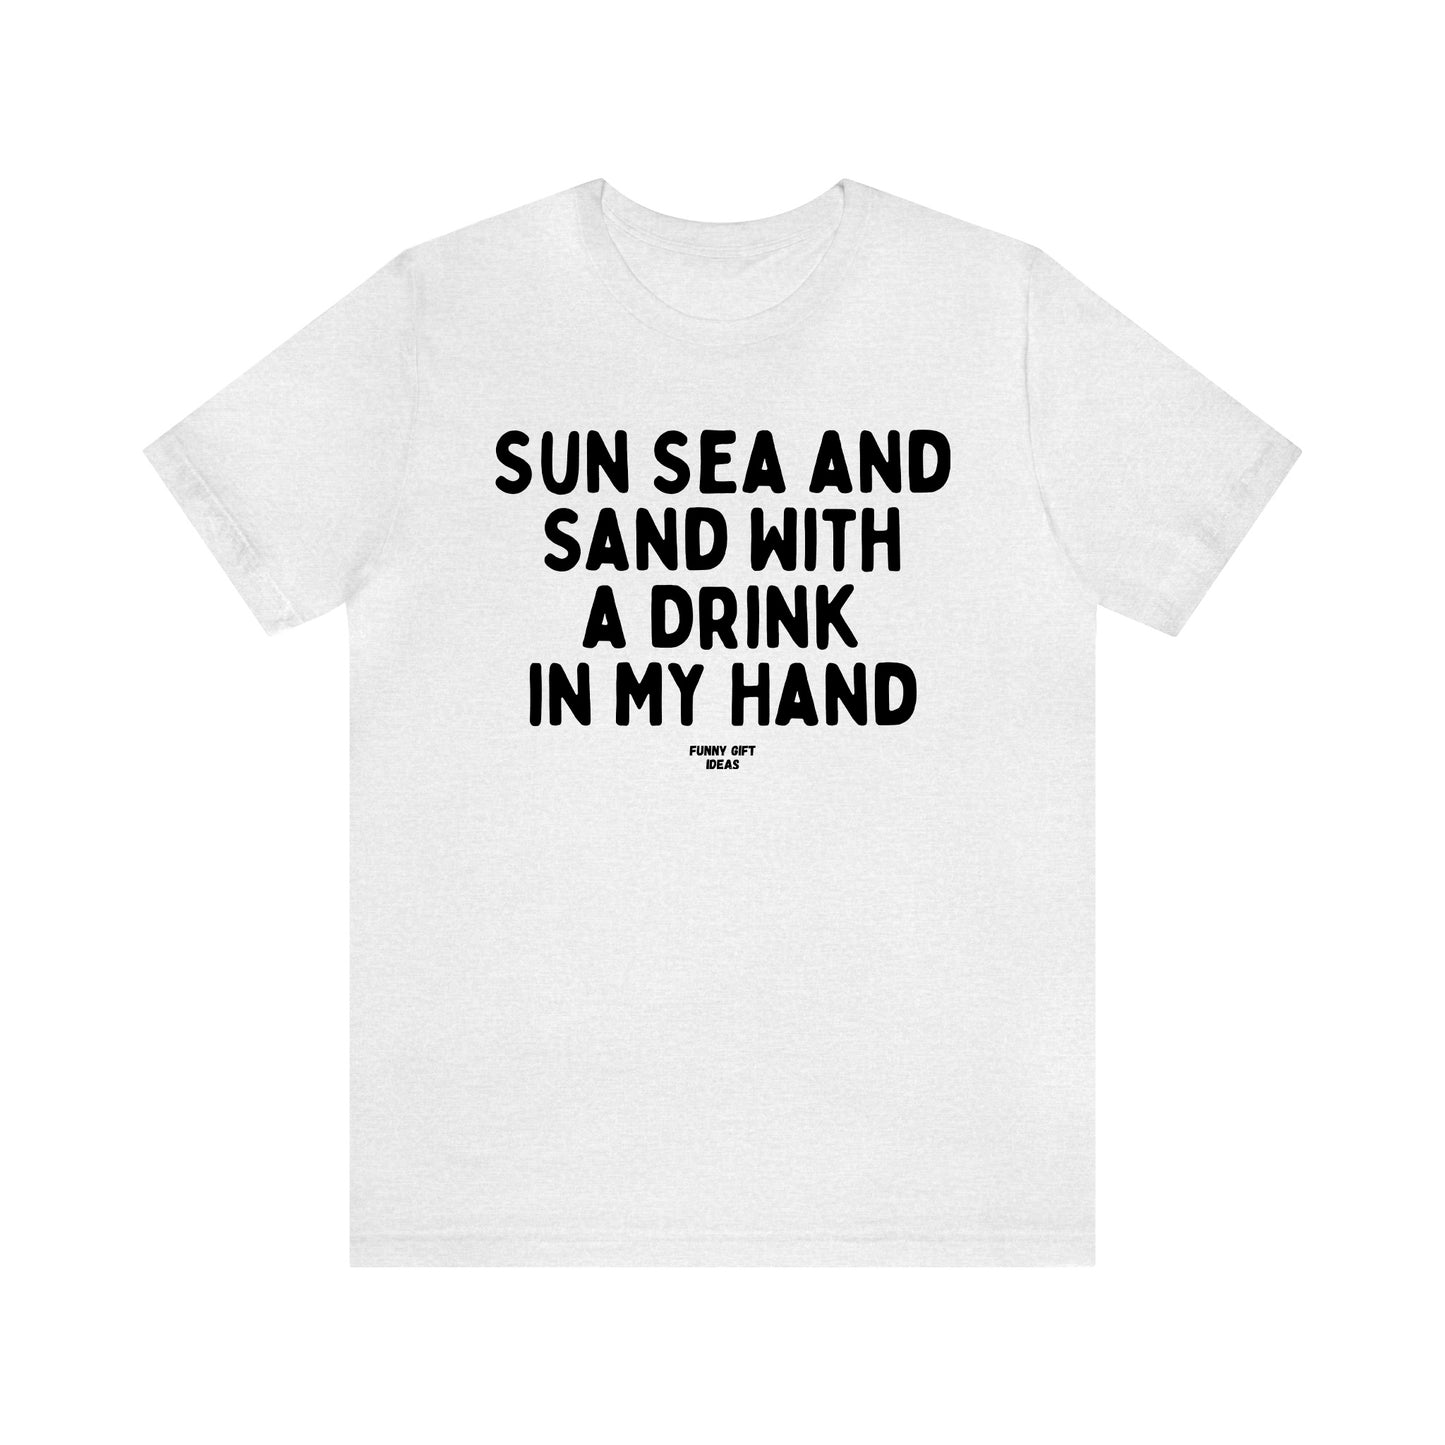 Funny Shirts for Women - Sun Sea and Sand With a Drink in My Hand - Women's T Shirts